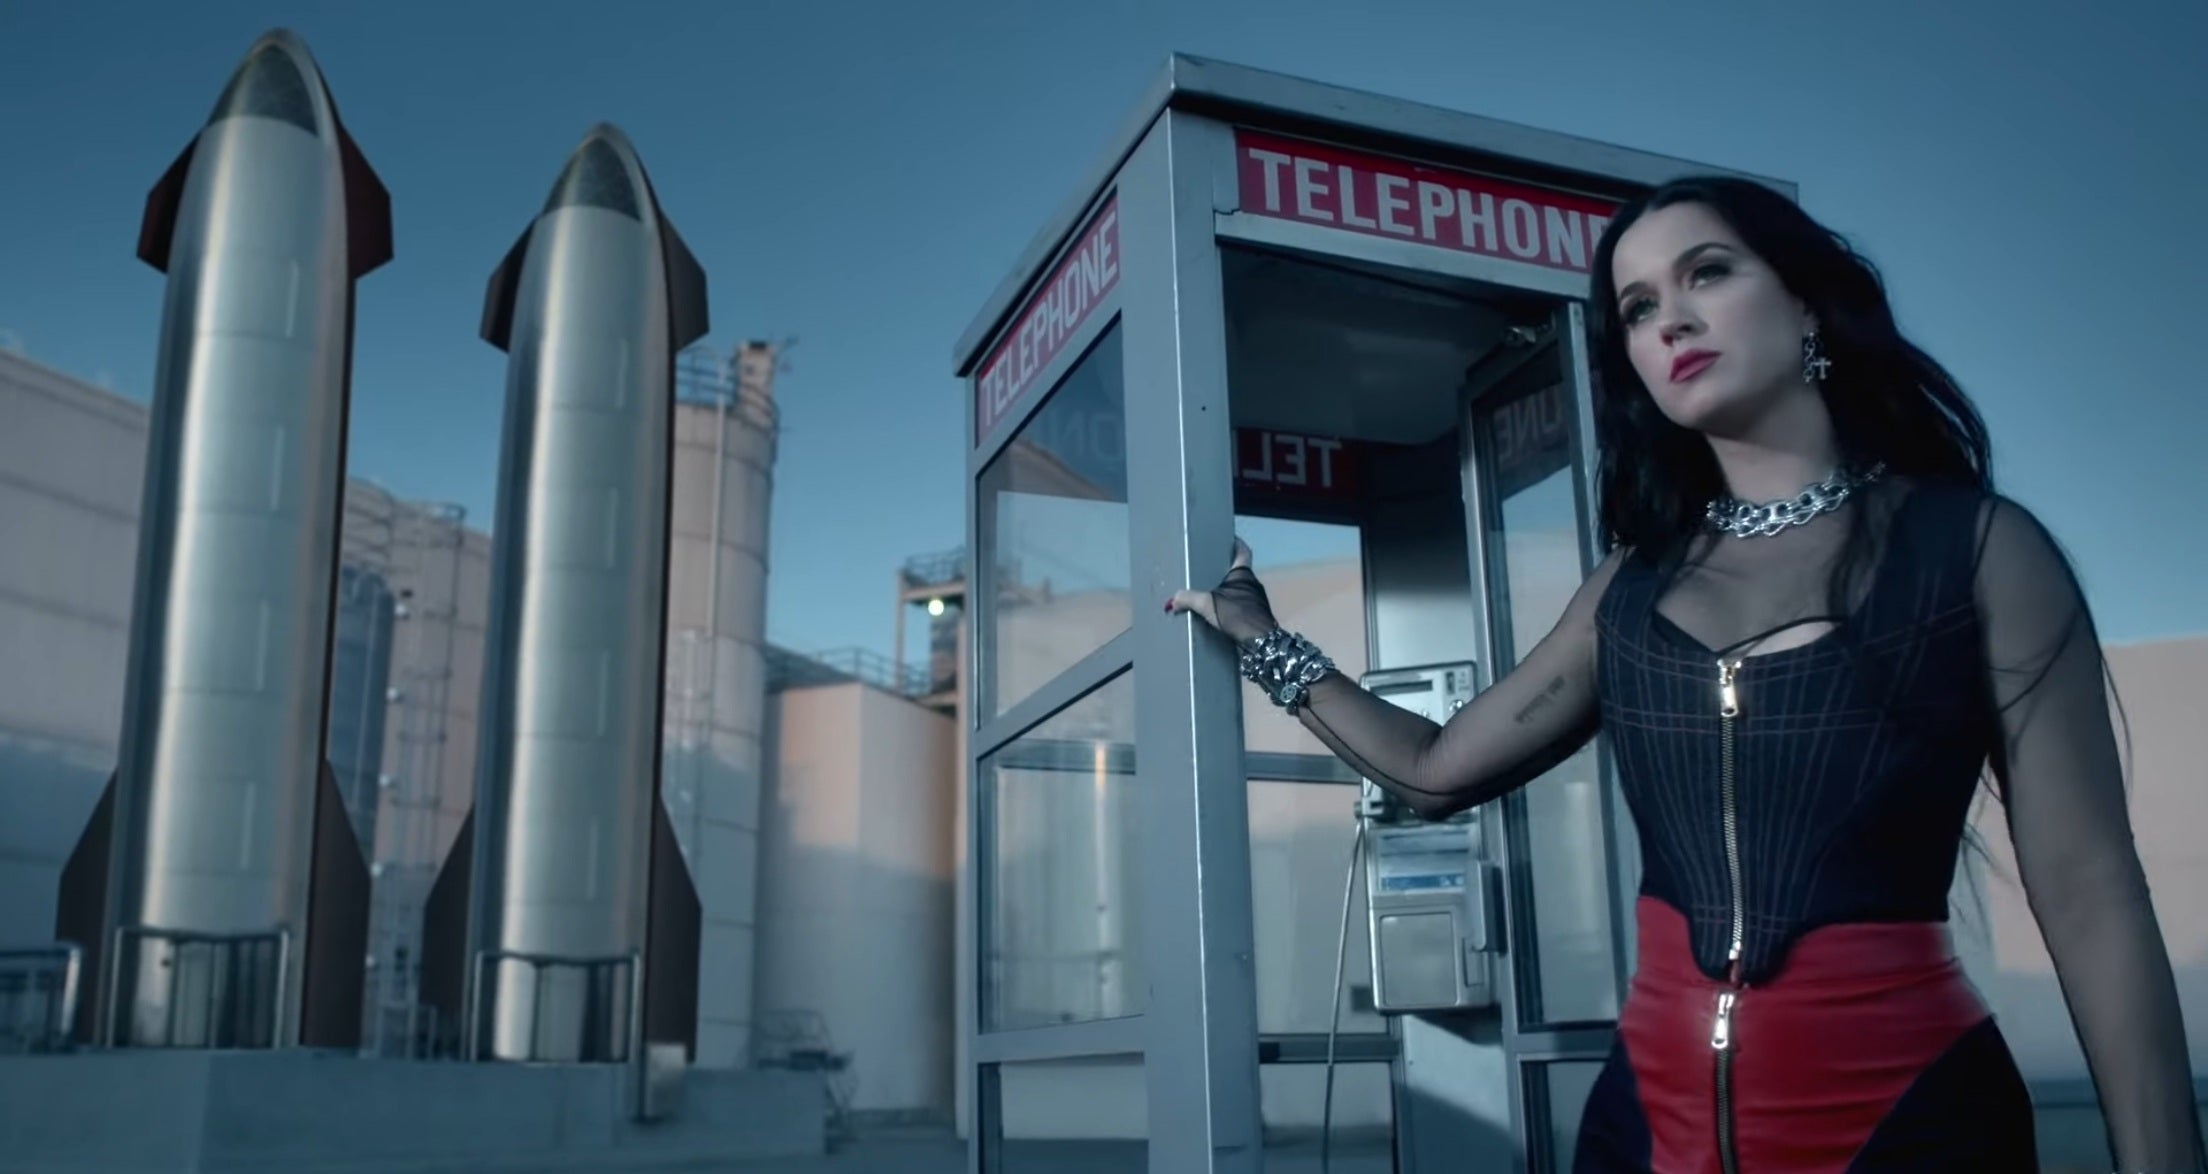 It Appears SpaceX Starship Launch Site Is The Source Of Inspiration For Katy Perry’s New Music Video